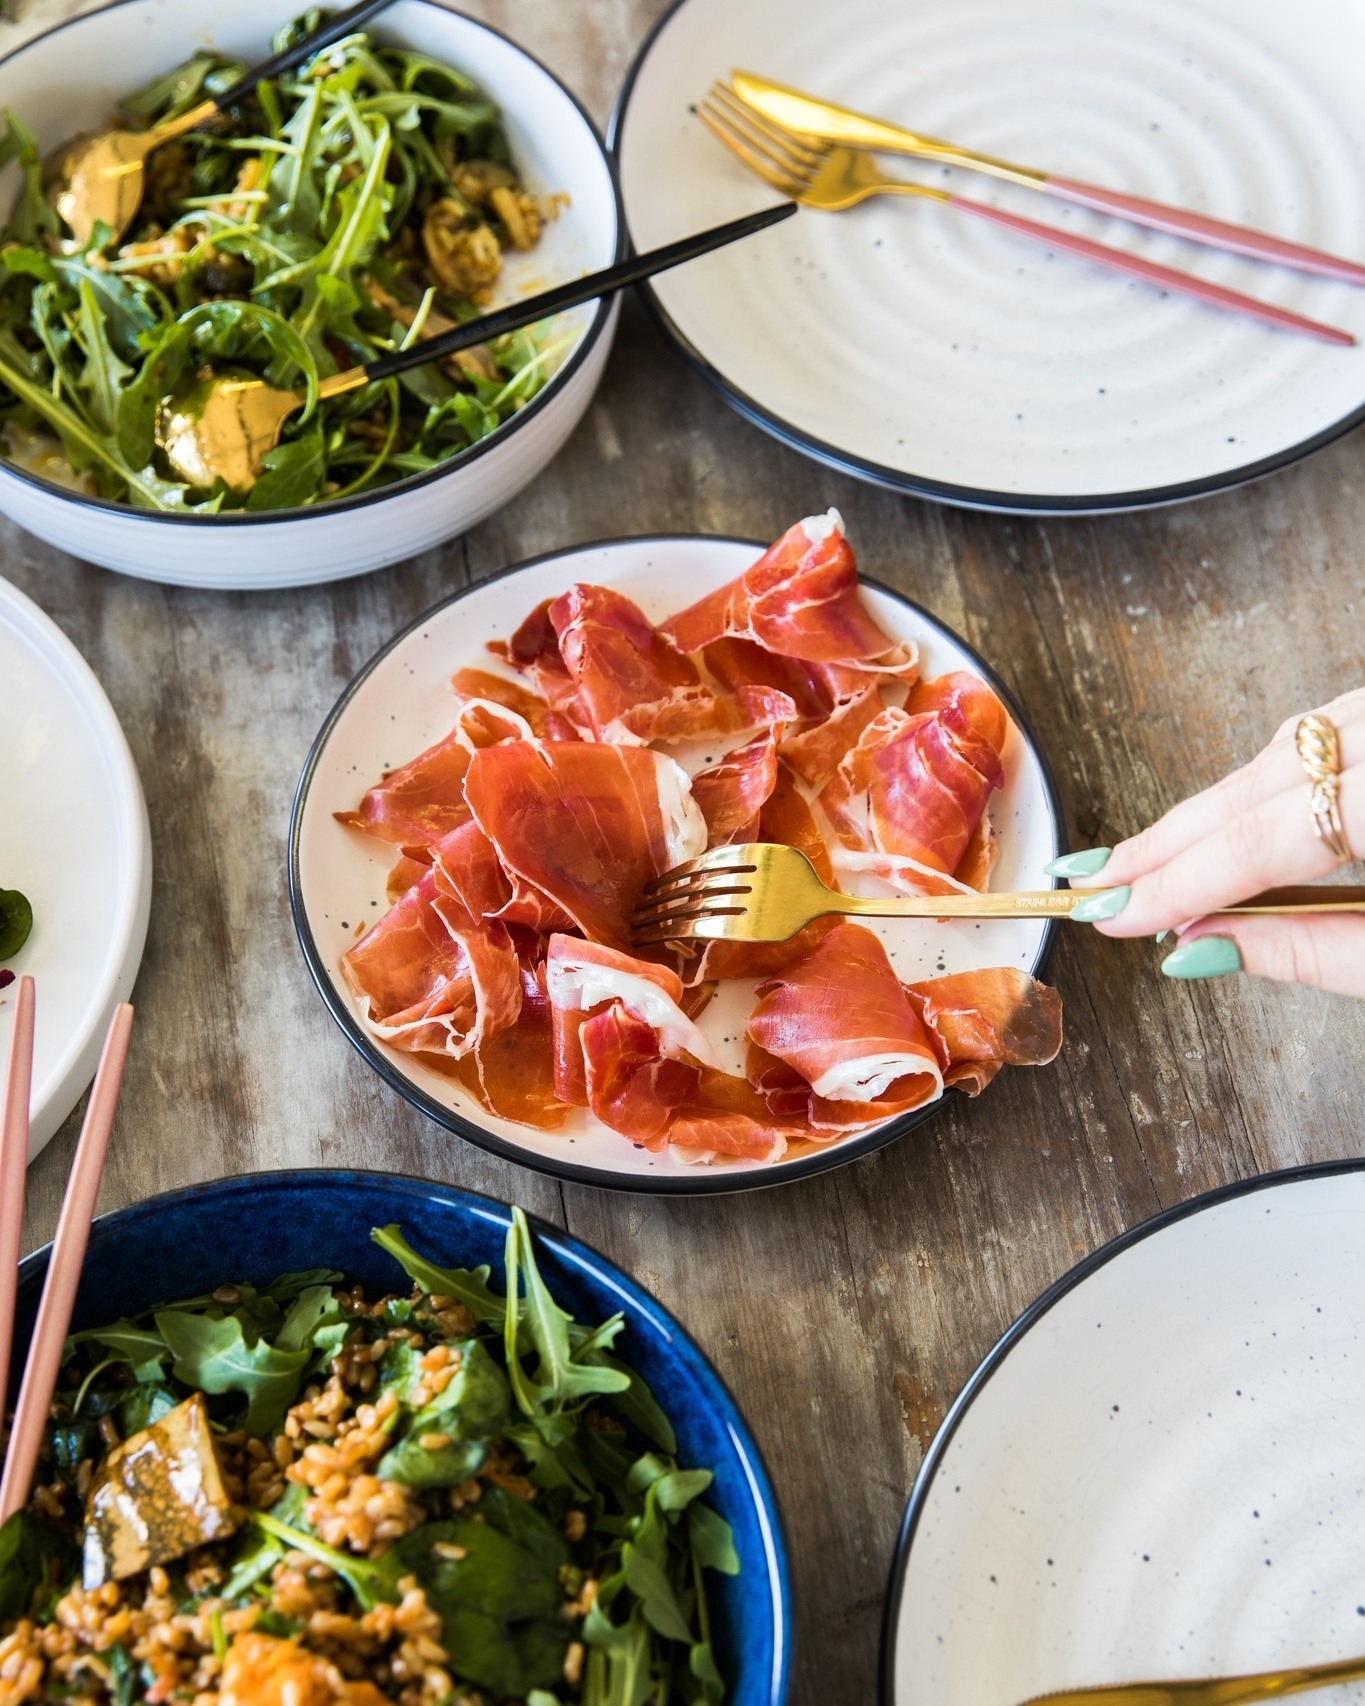 Person dining on prosciutto and salad at a table with multiple dishes